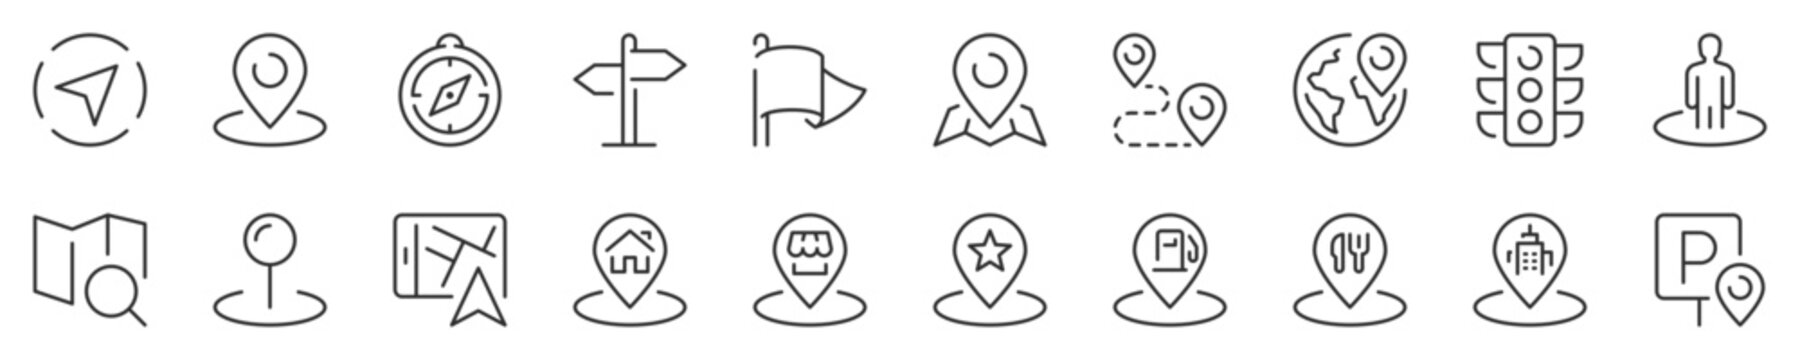 Line icons about navigation and location, thin line icon set 1/2. Symbol collection in transparent background. Editable vector stroke. 512x512 Pixel Perfect.